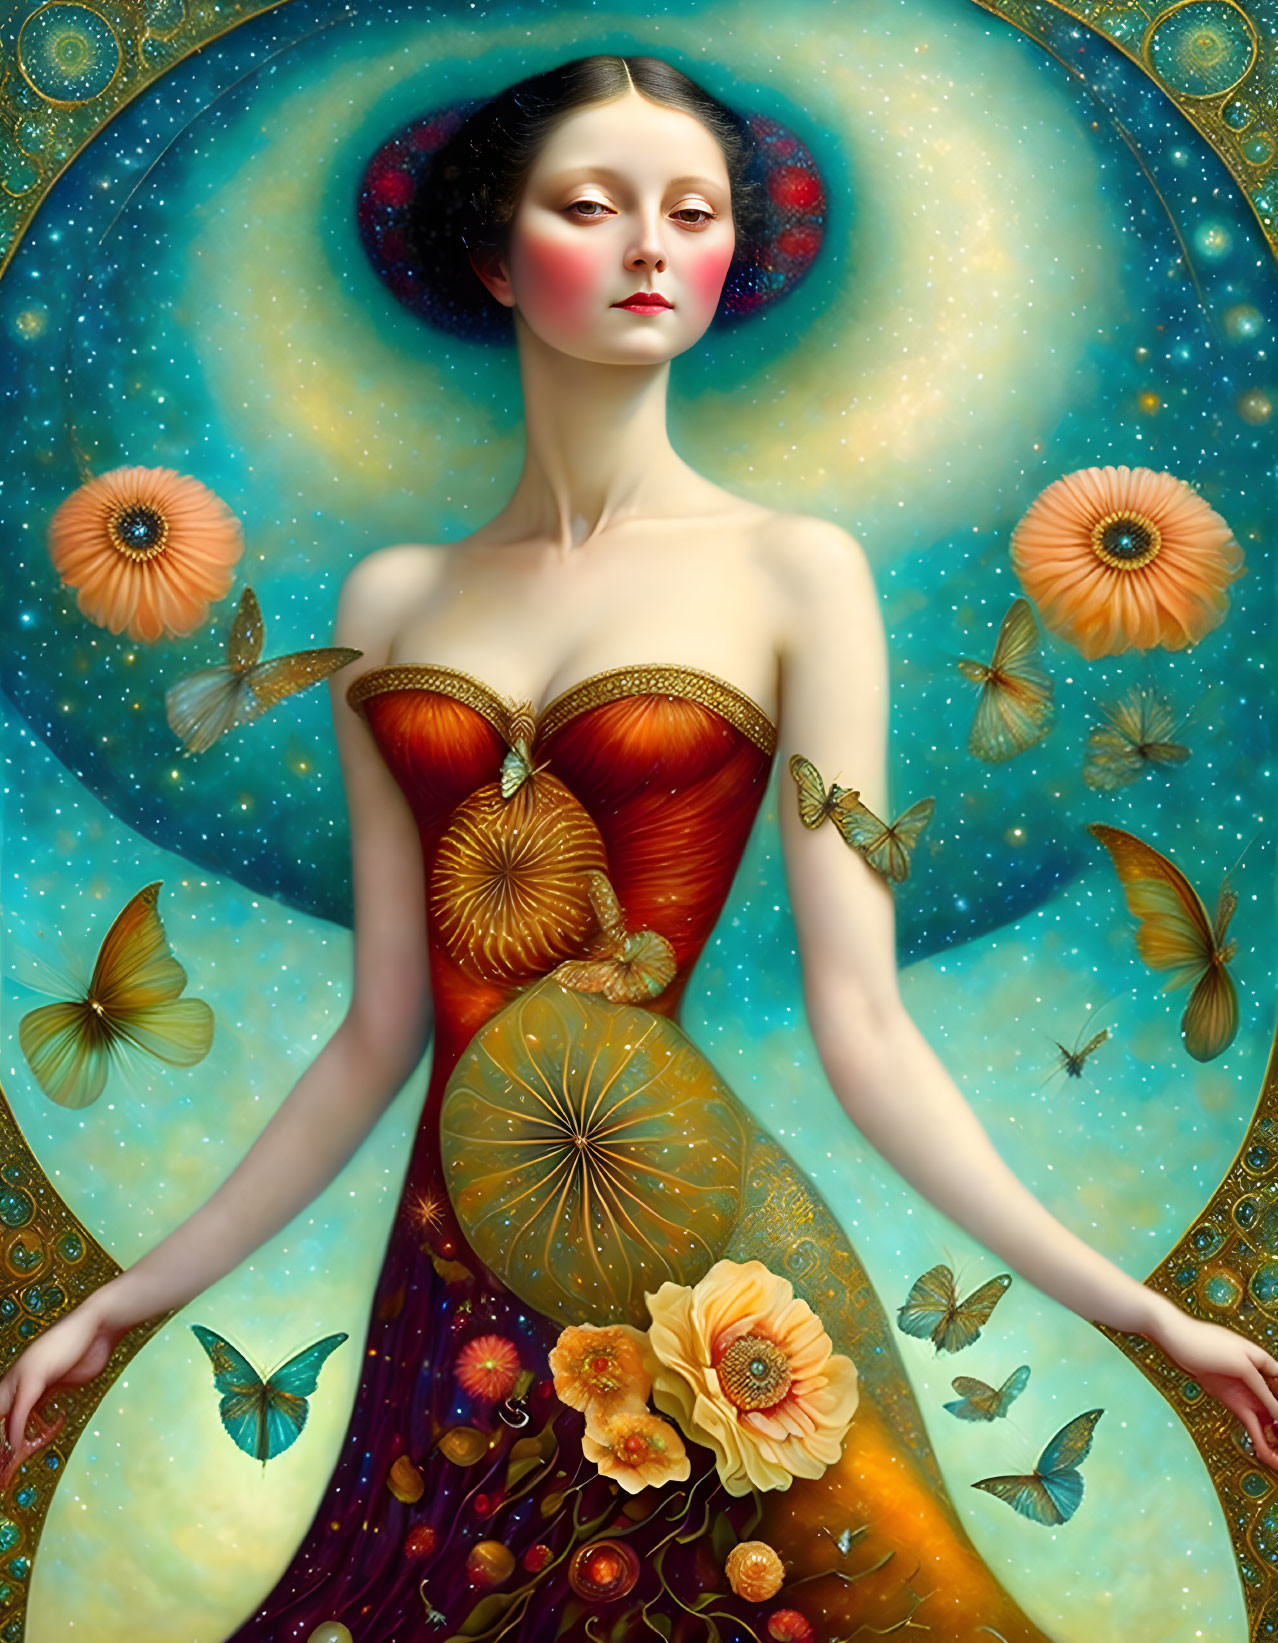 Surreal painting: Woman with cosmos background and floral dress